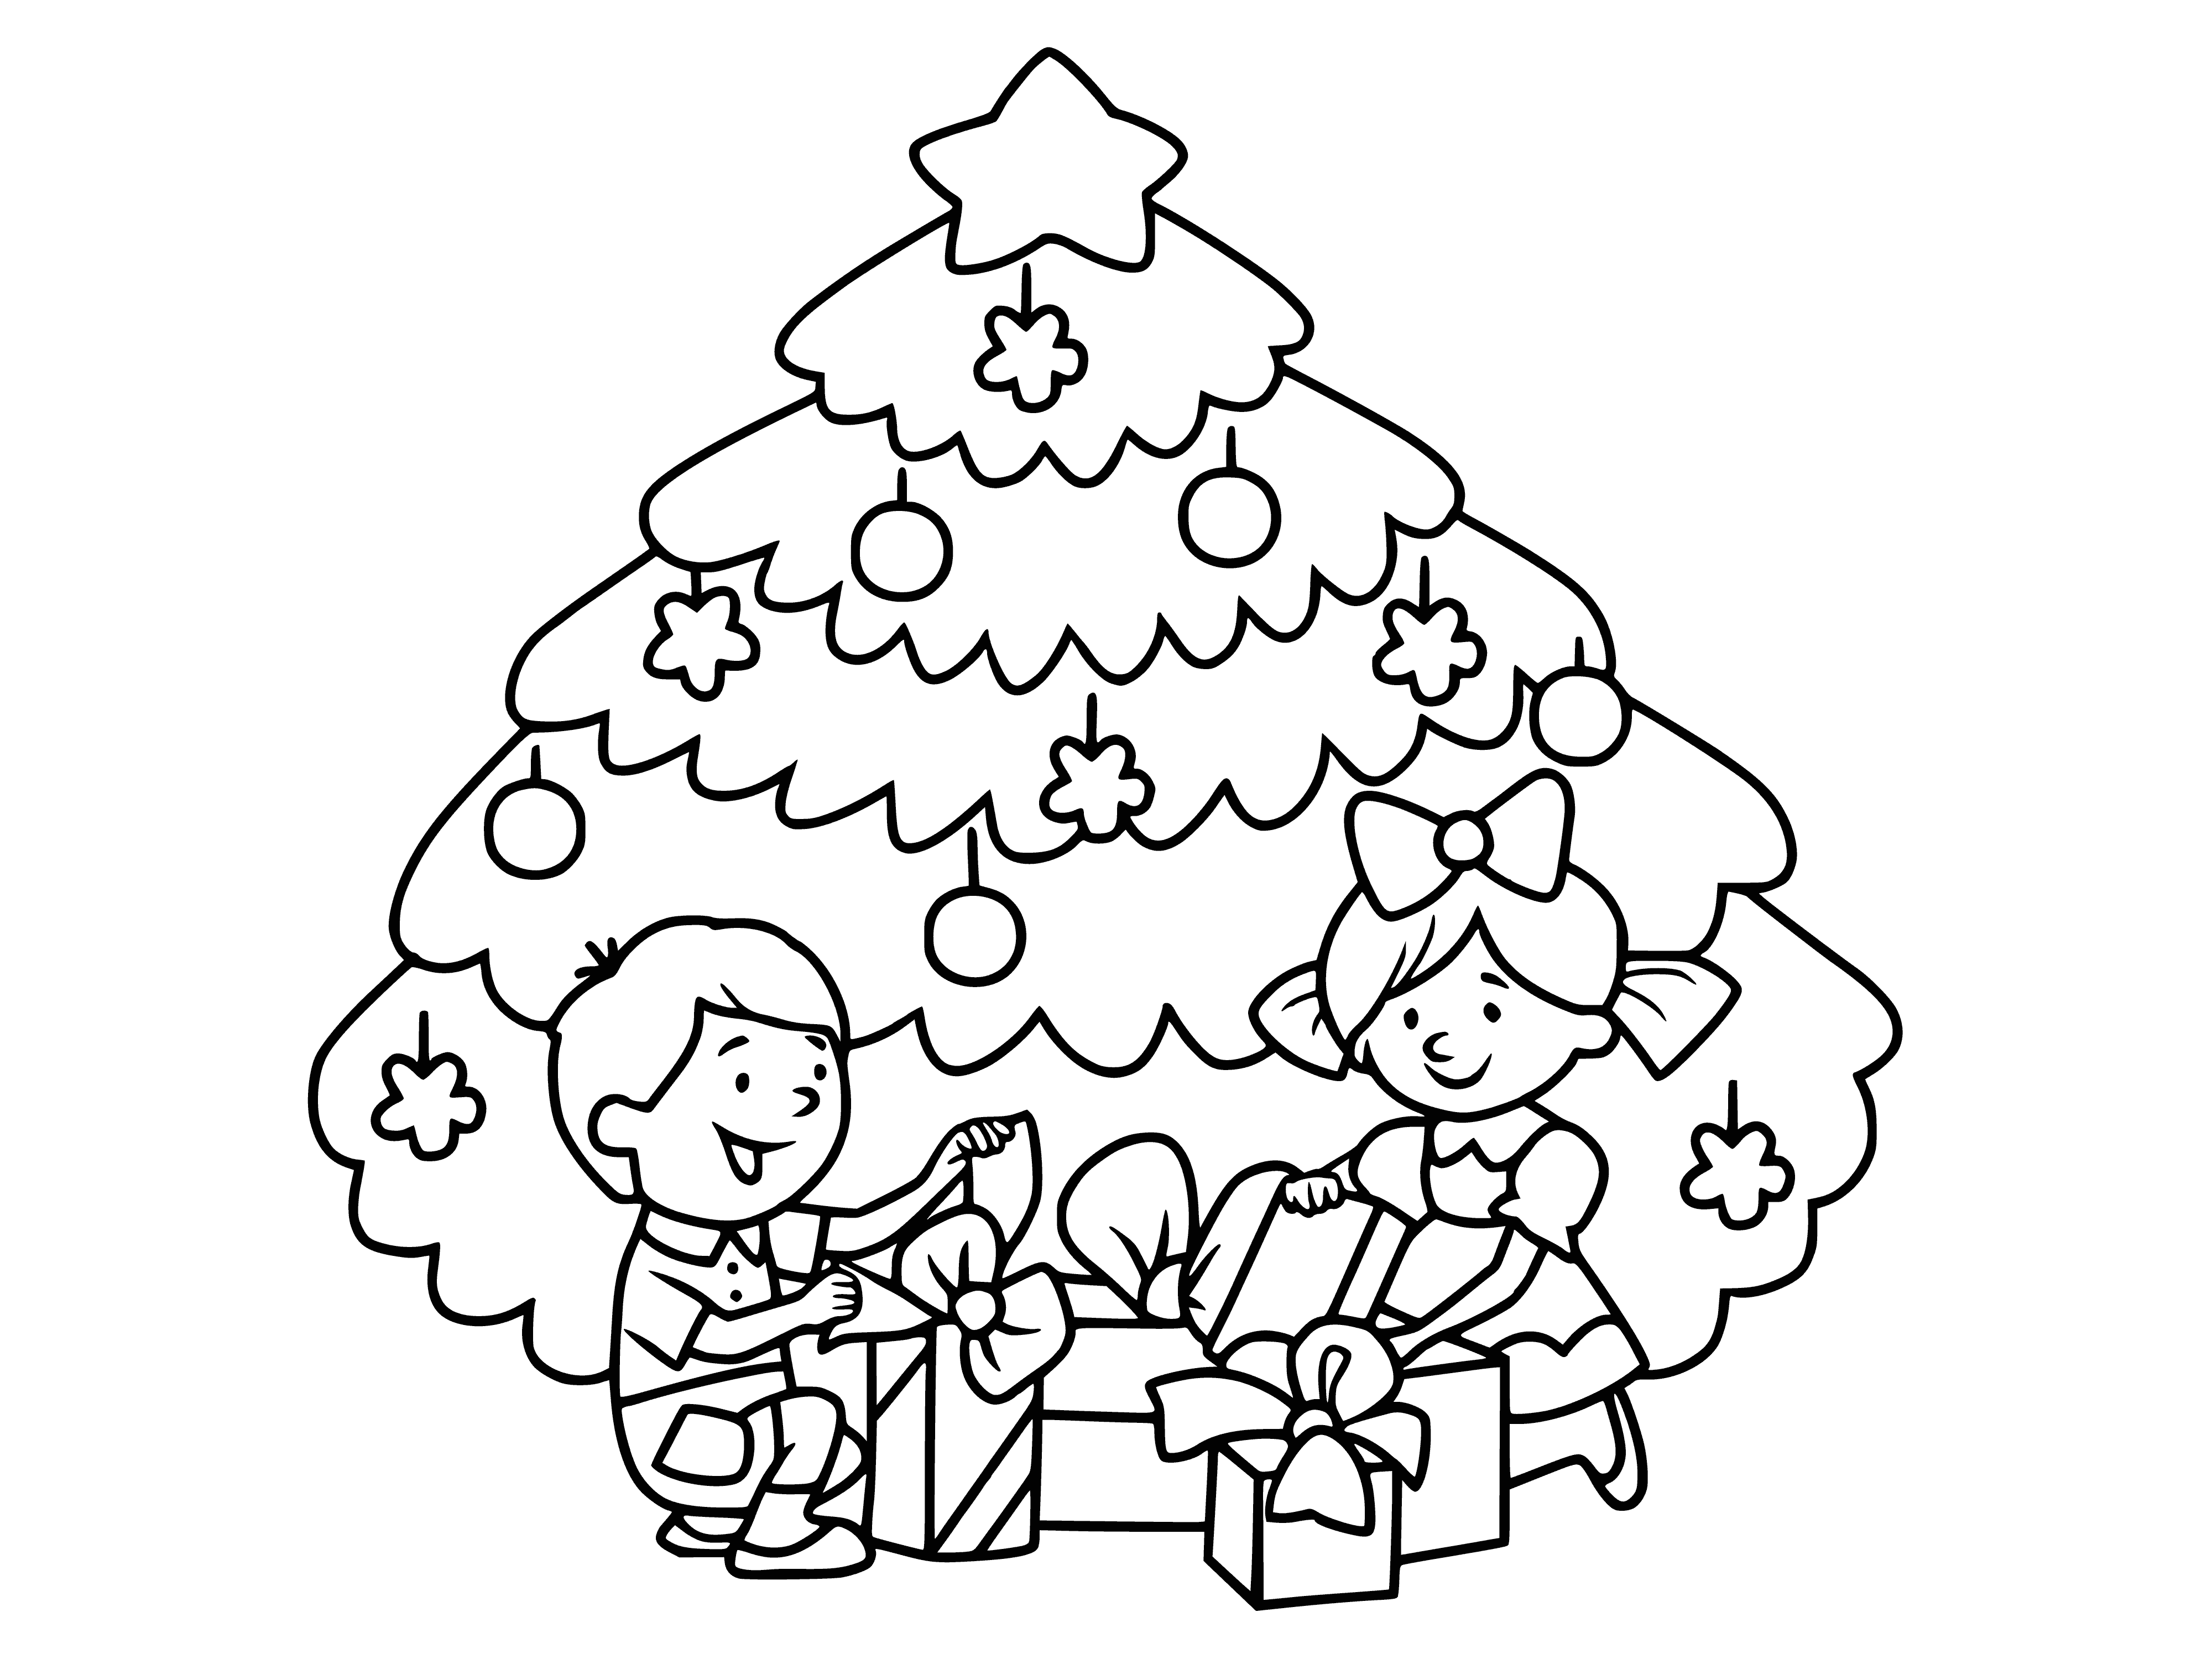 coloring page: are a festive holiday decoration that symbolizes family, love and gratitude.

Christmas trees symbolize family, love & gratitude - a festive holiday decoration with presents underneath. #ChristmasSpirit